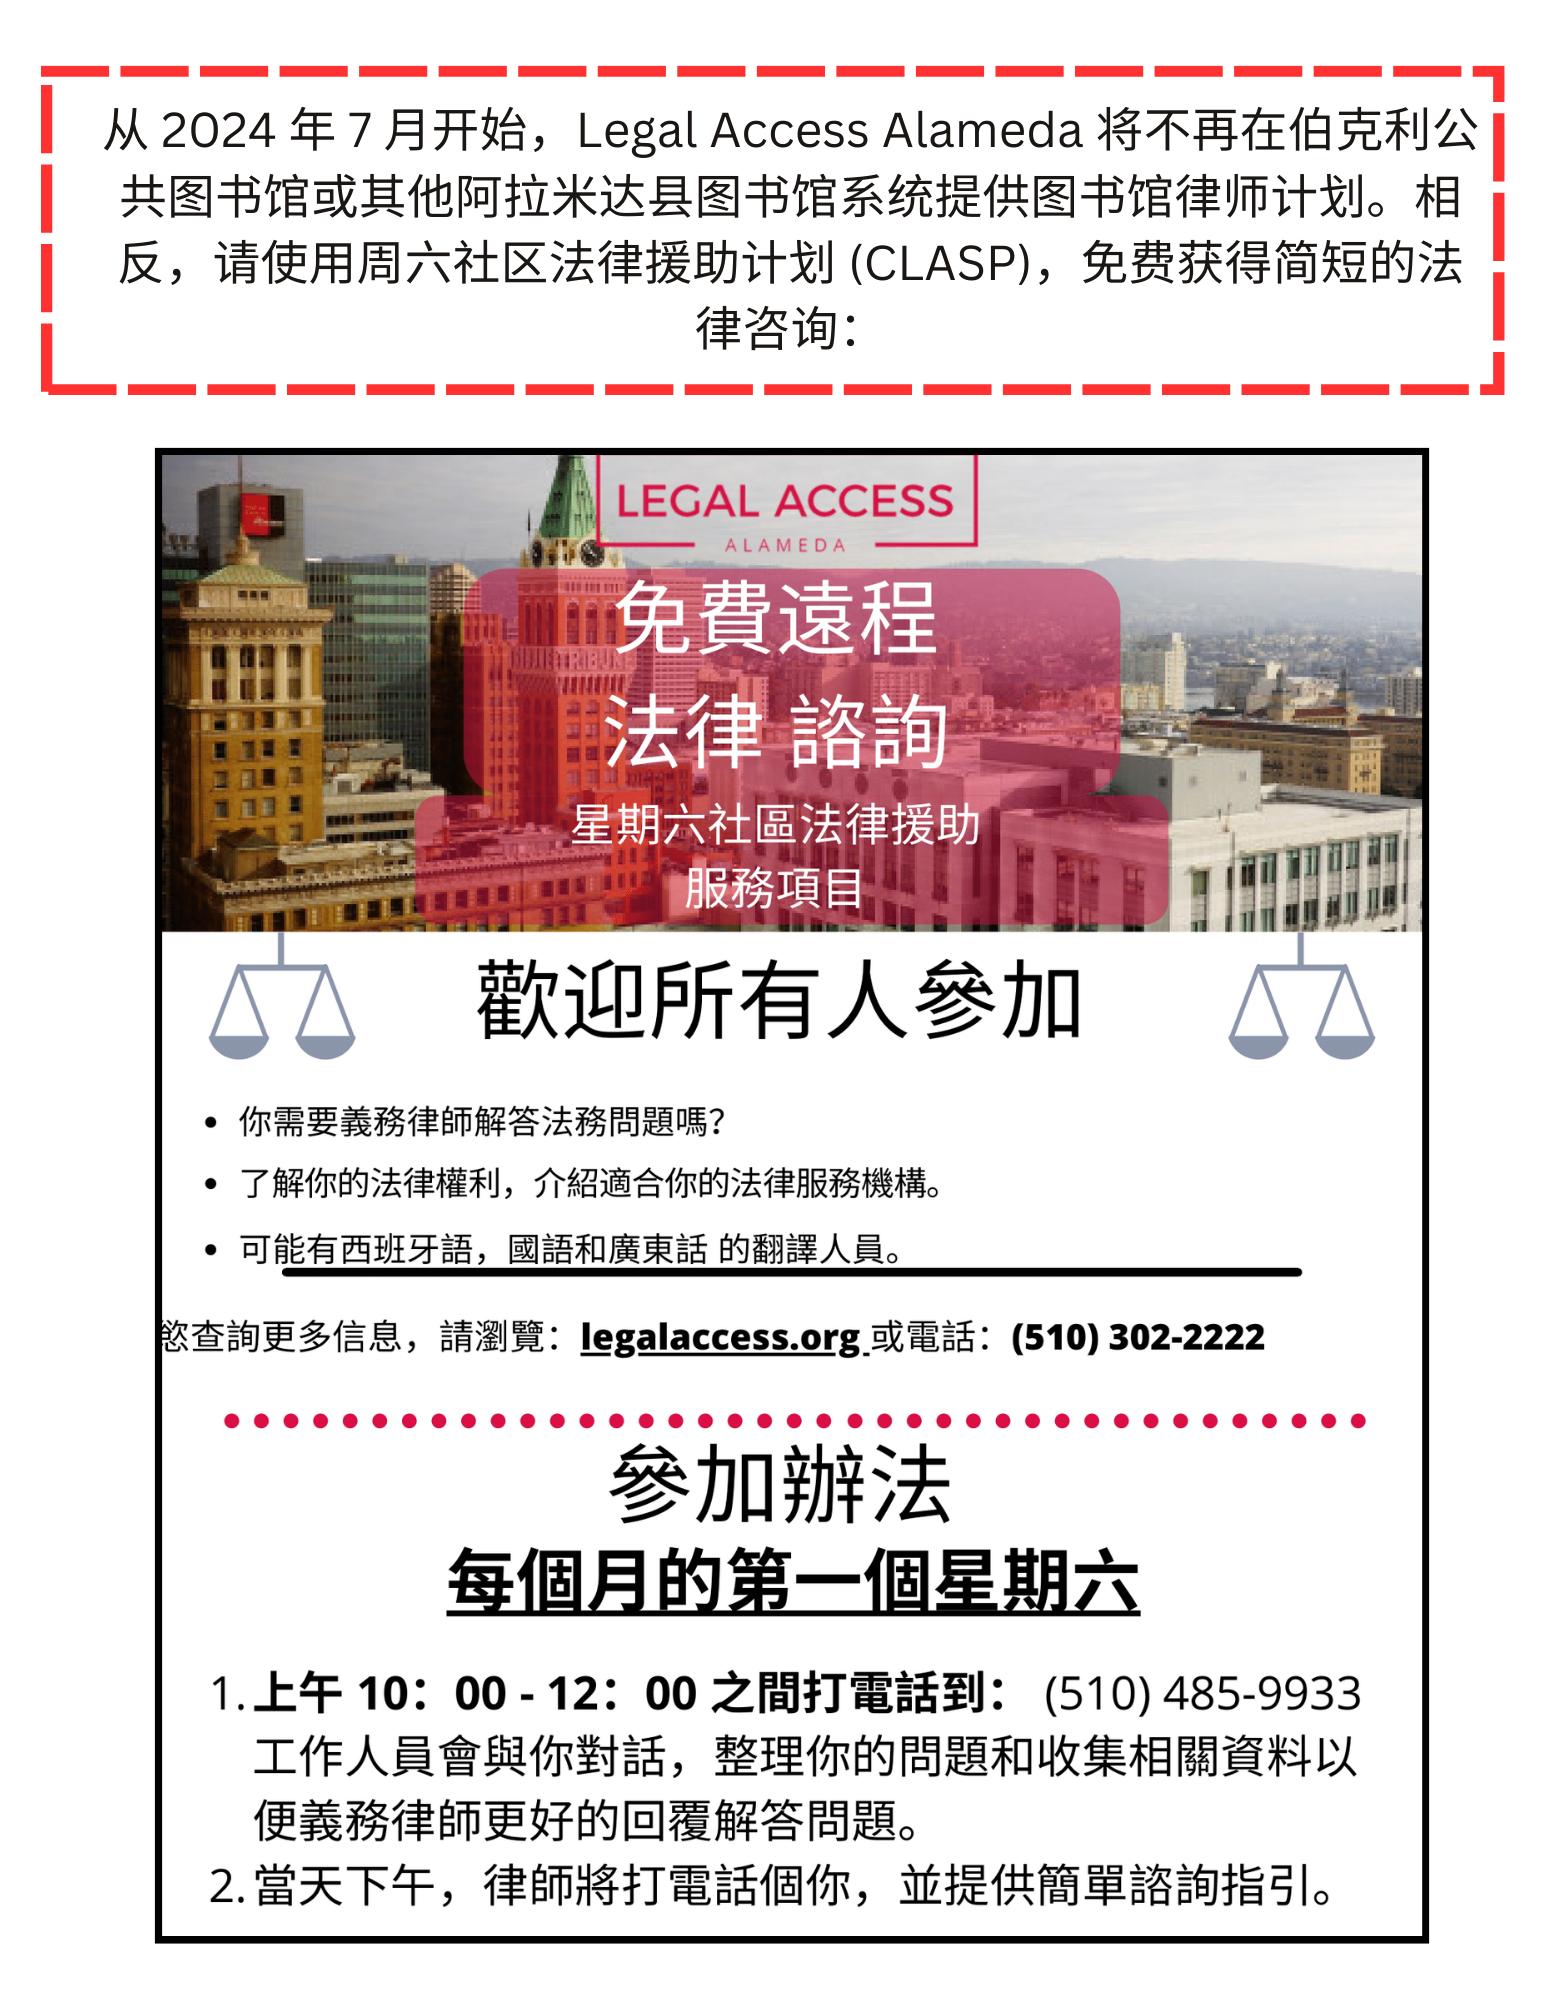 Community Legal Appointment Saturday Program flyer in Chinese